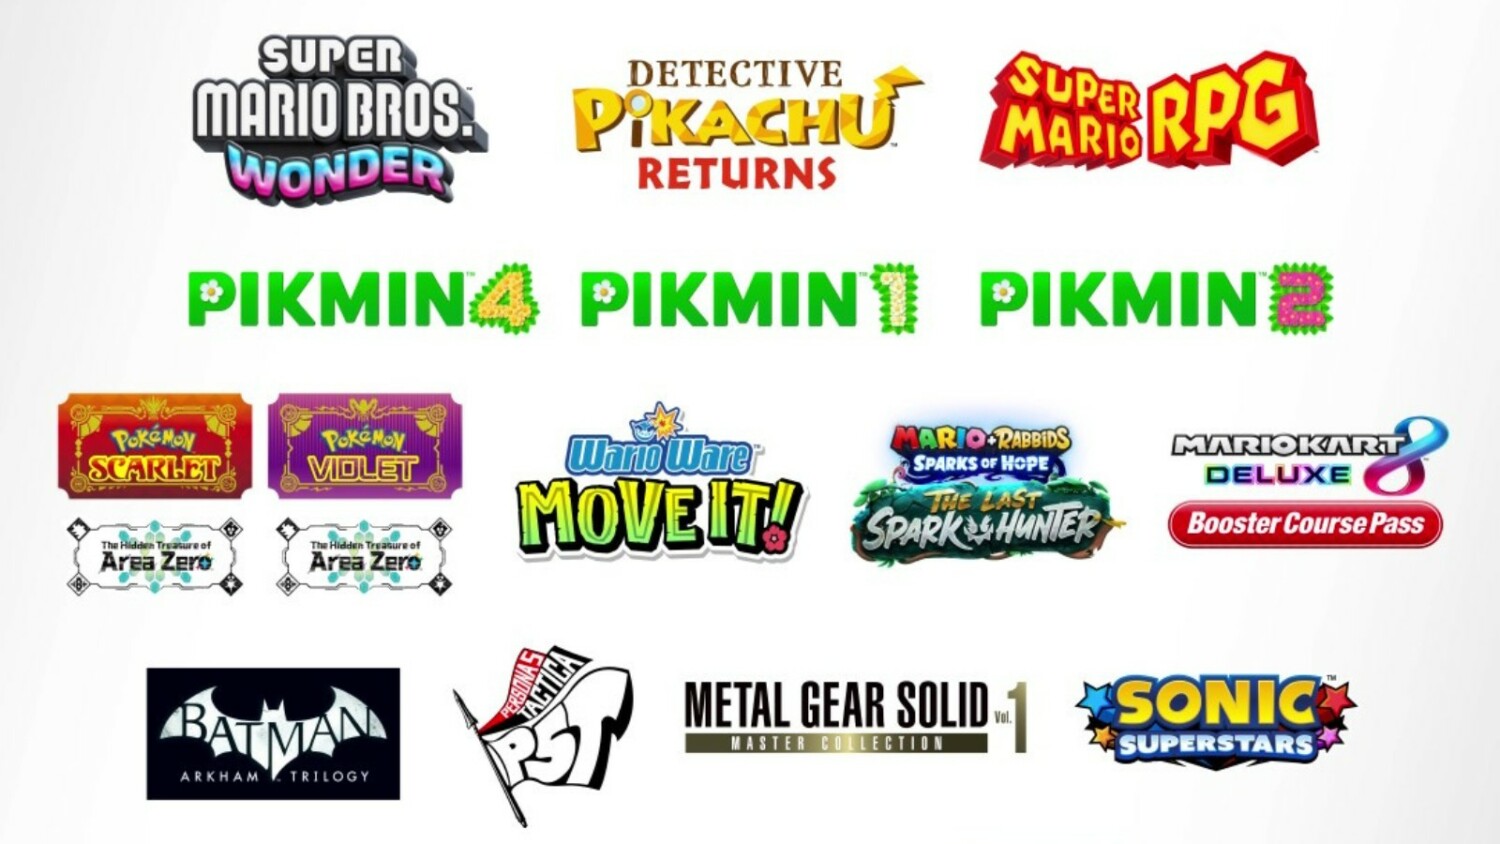 Nintendo gave us an infographic of all the Direct Mini announcements